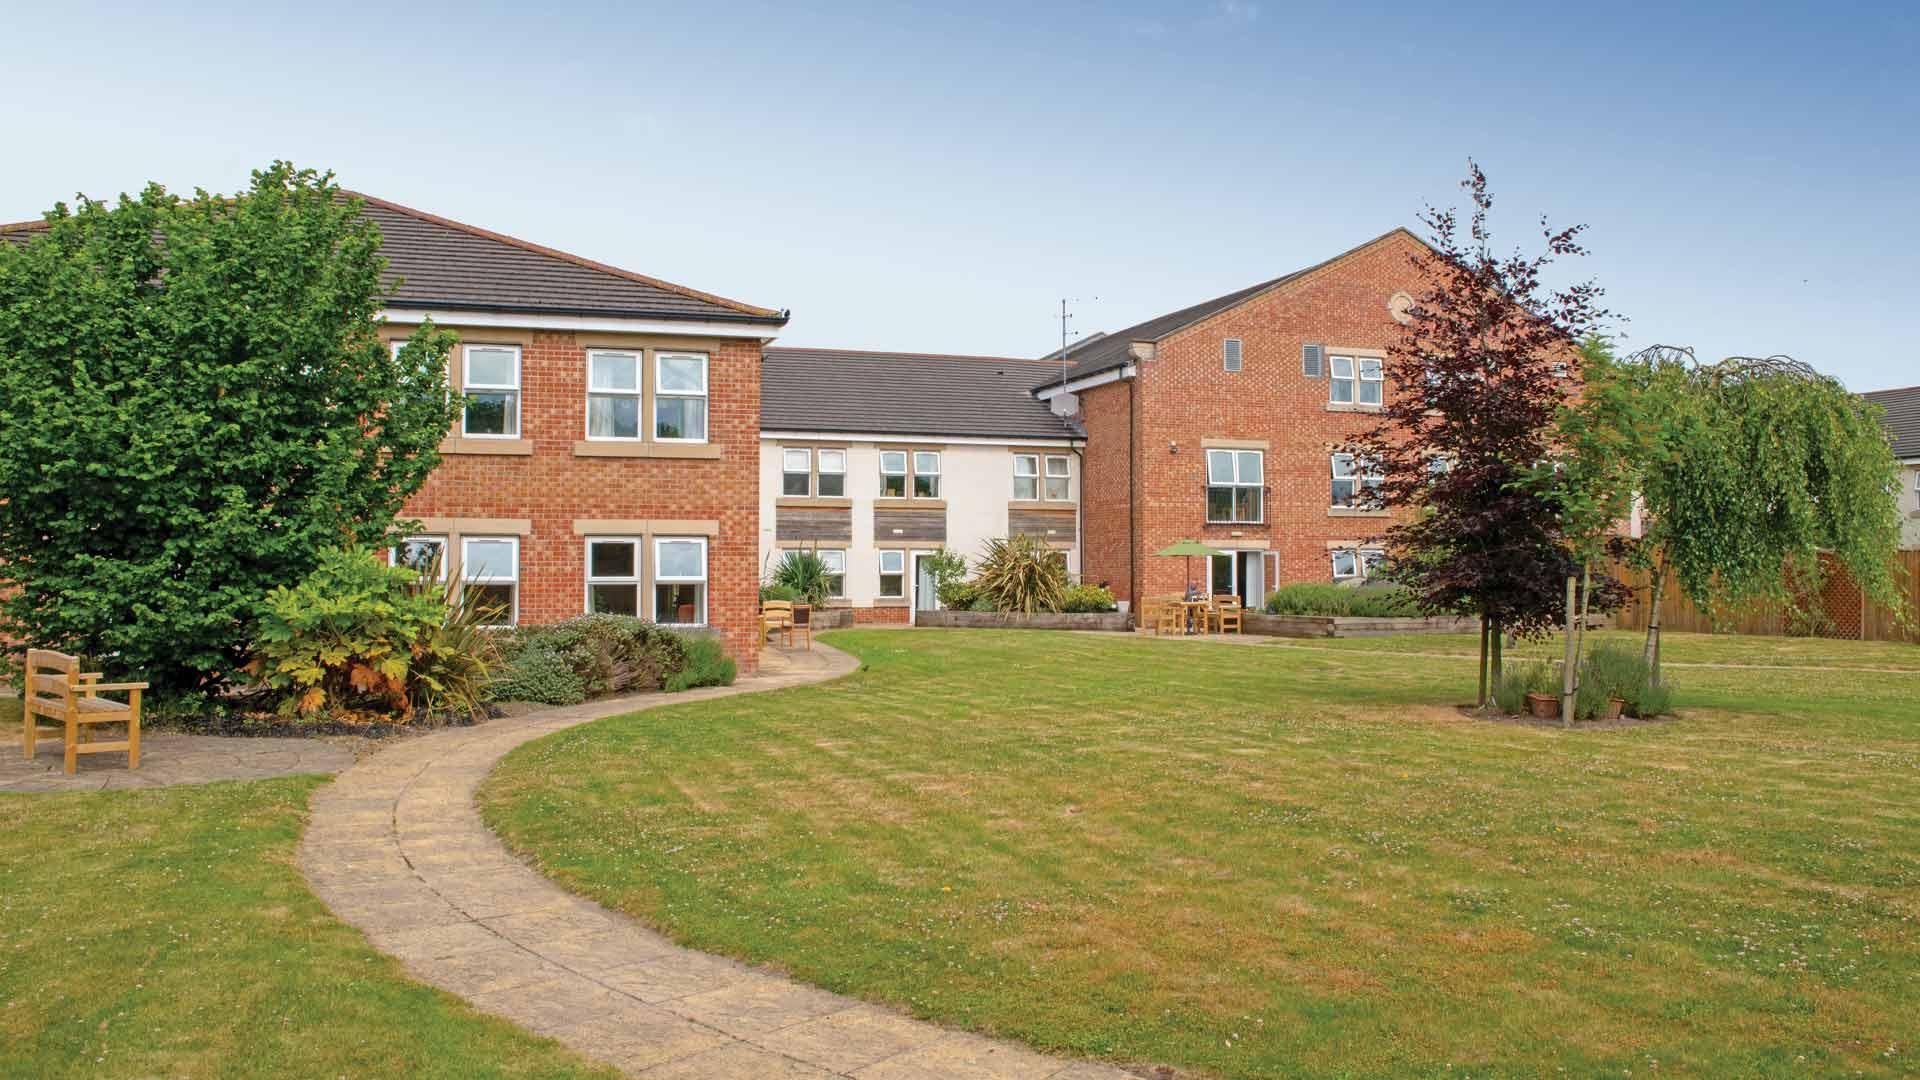 thornton hall and lodge care home large garden